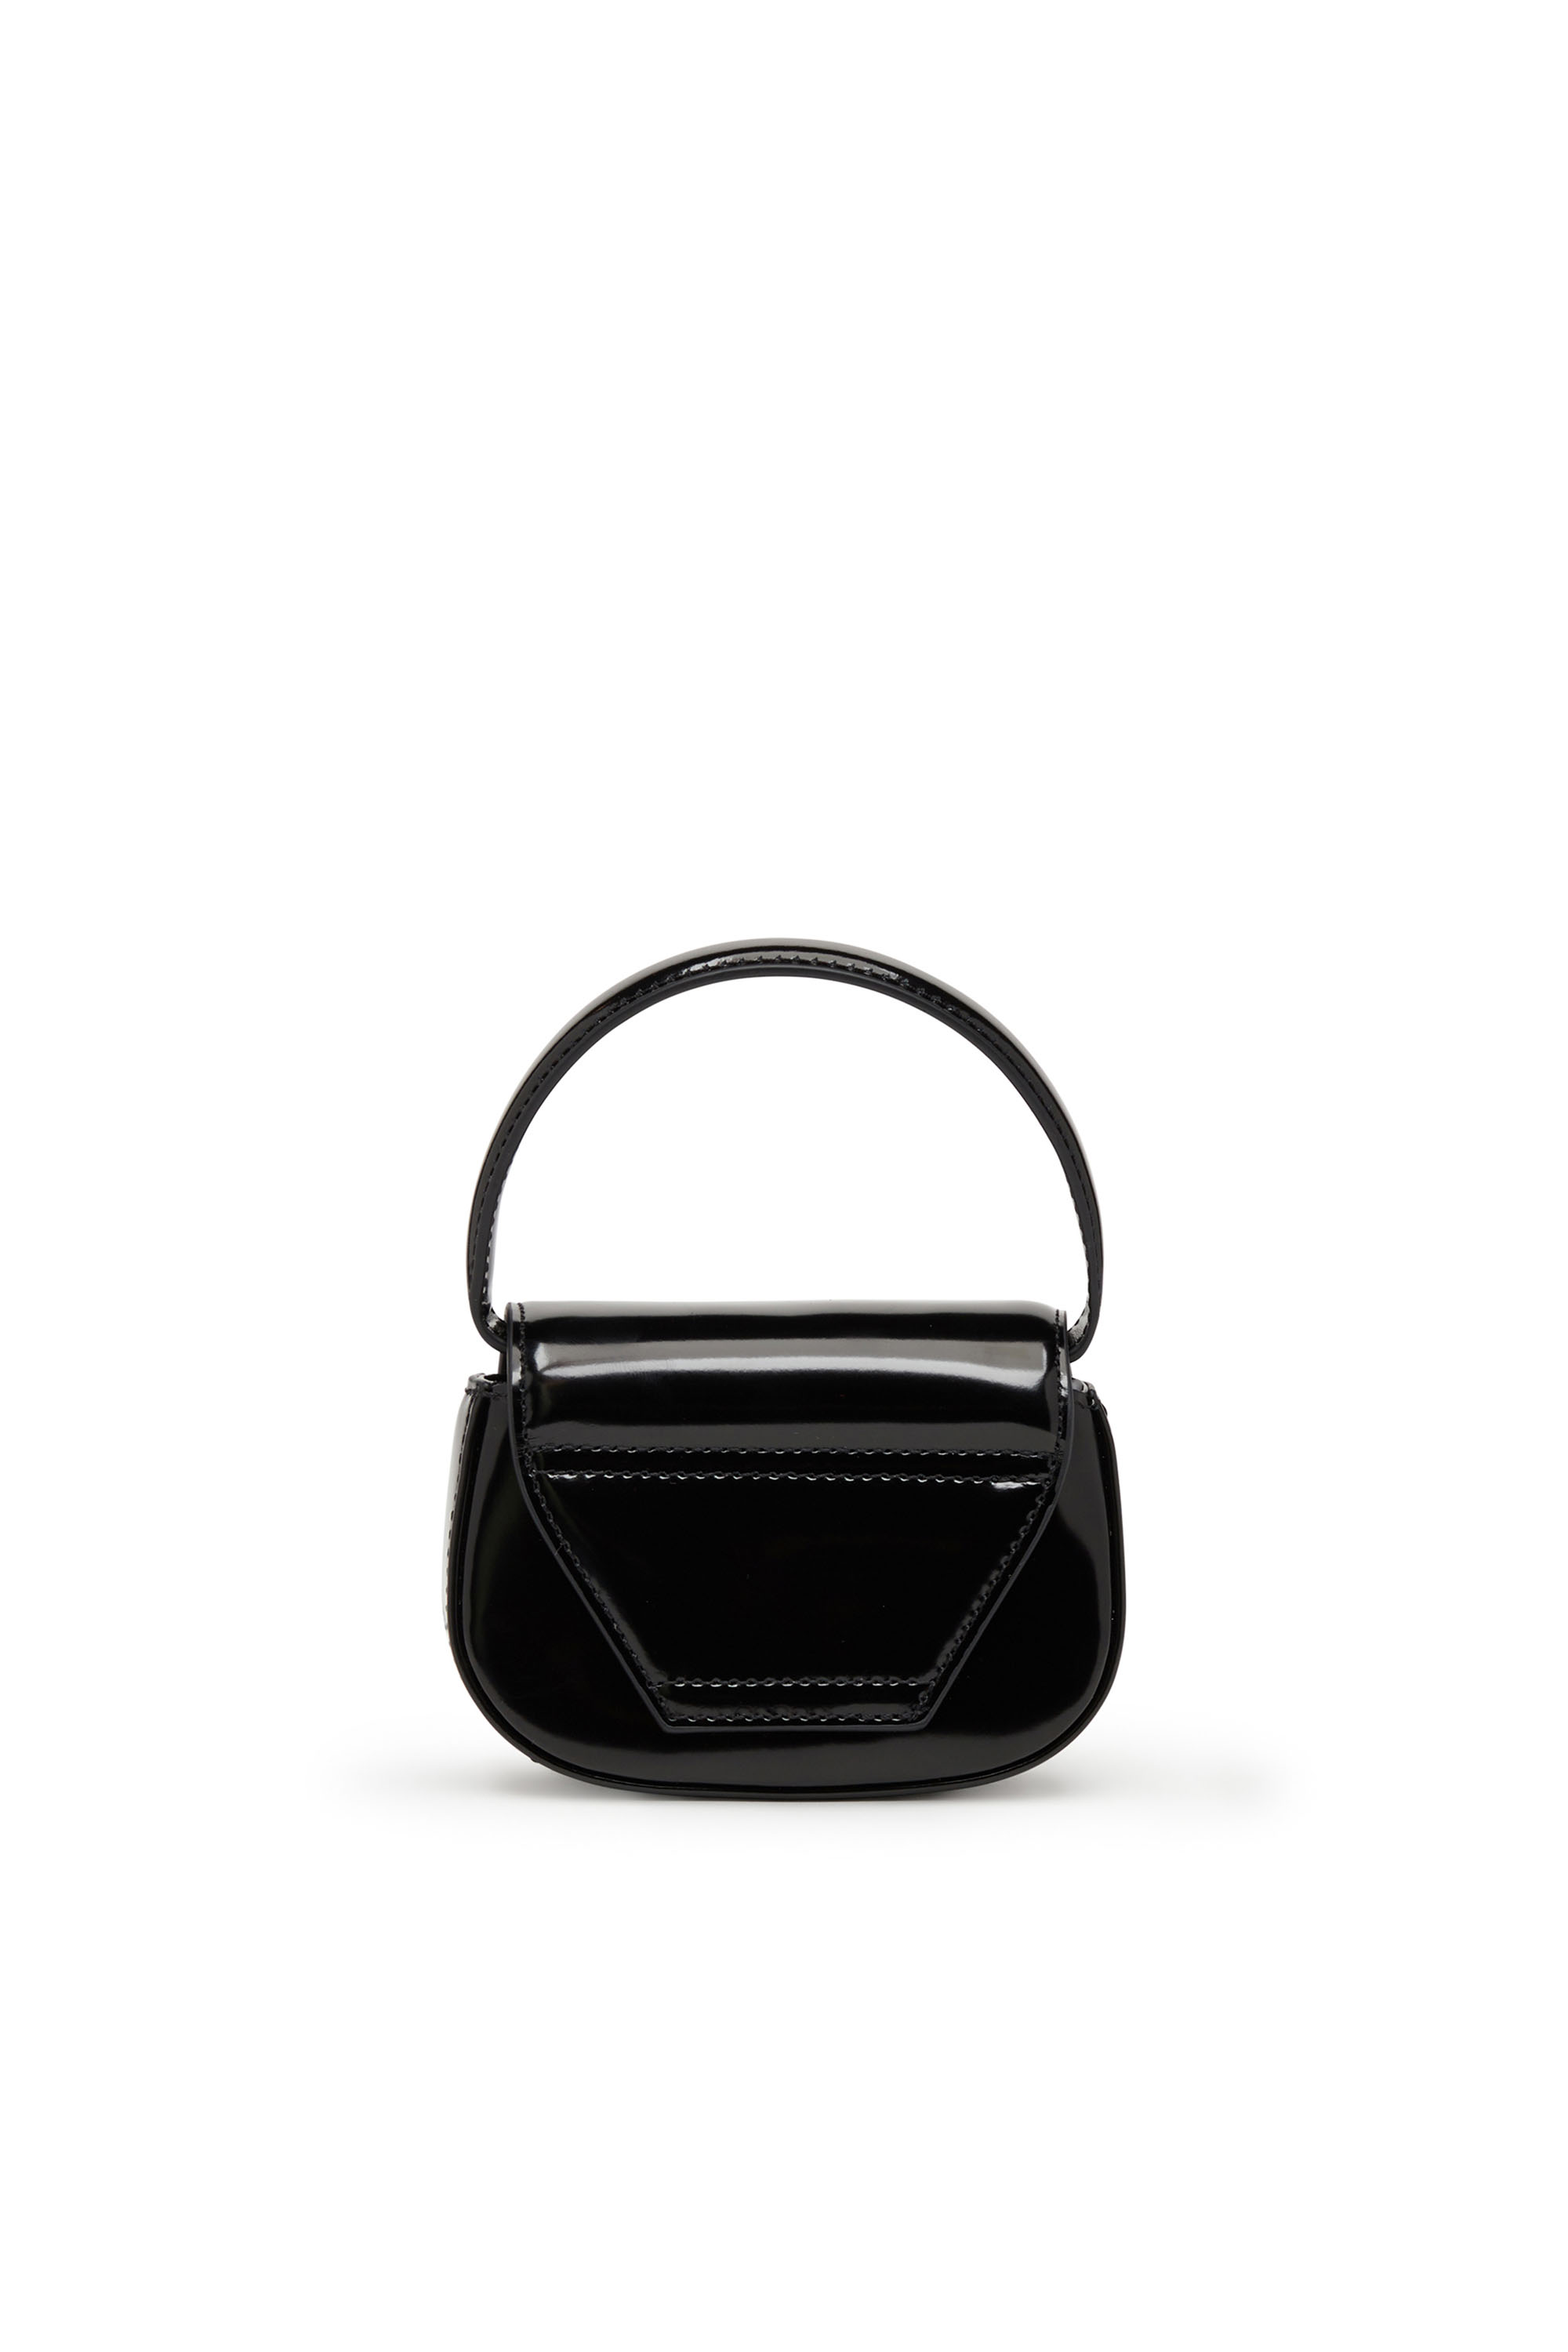 Diesel - 1DR-XS-S, Woman 1DR-XS-S-Iconic mini bag in mirrored leather in Black - Image 2